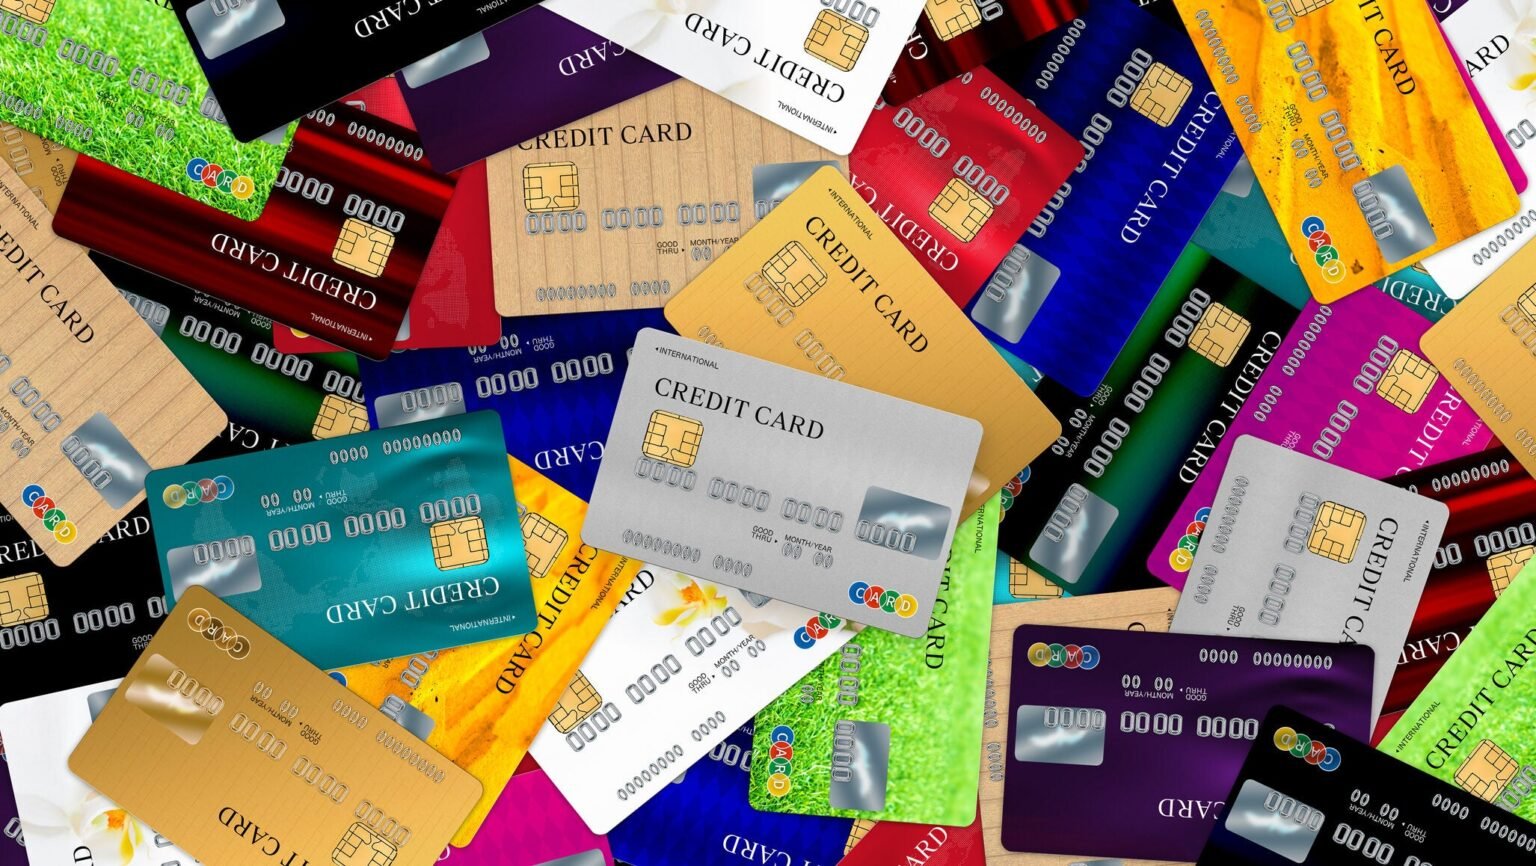 credit-card-companies-increasing-competition-for-small-business-customers